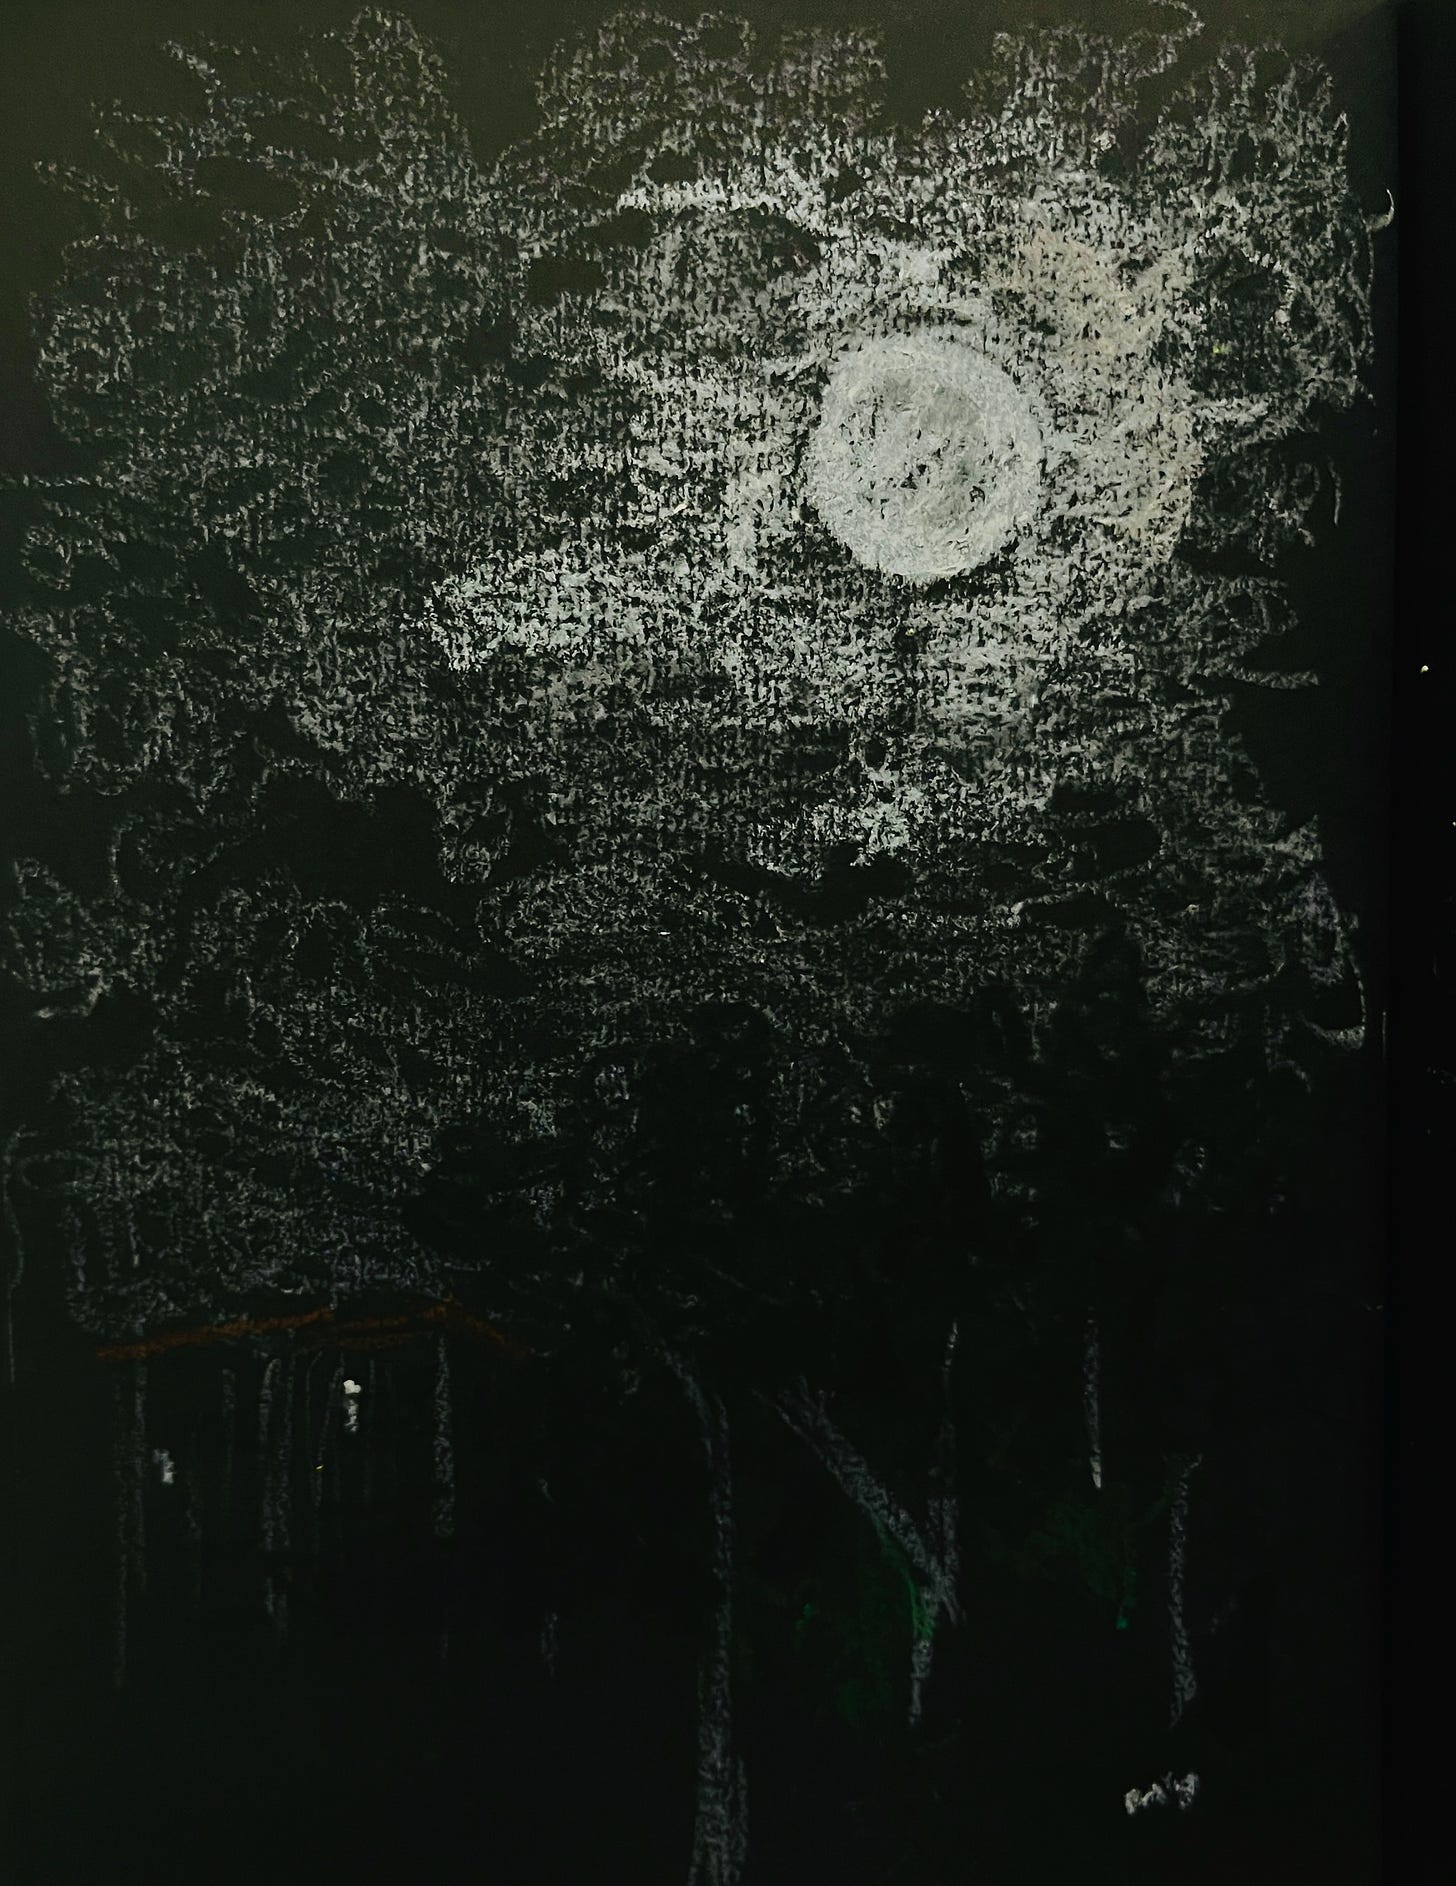 image: black paper colour notebook with oil pastel sketch of a full moon scene